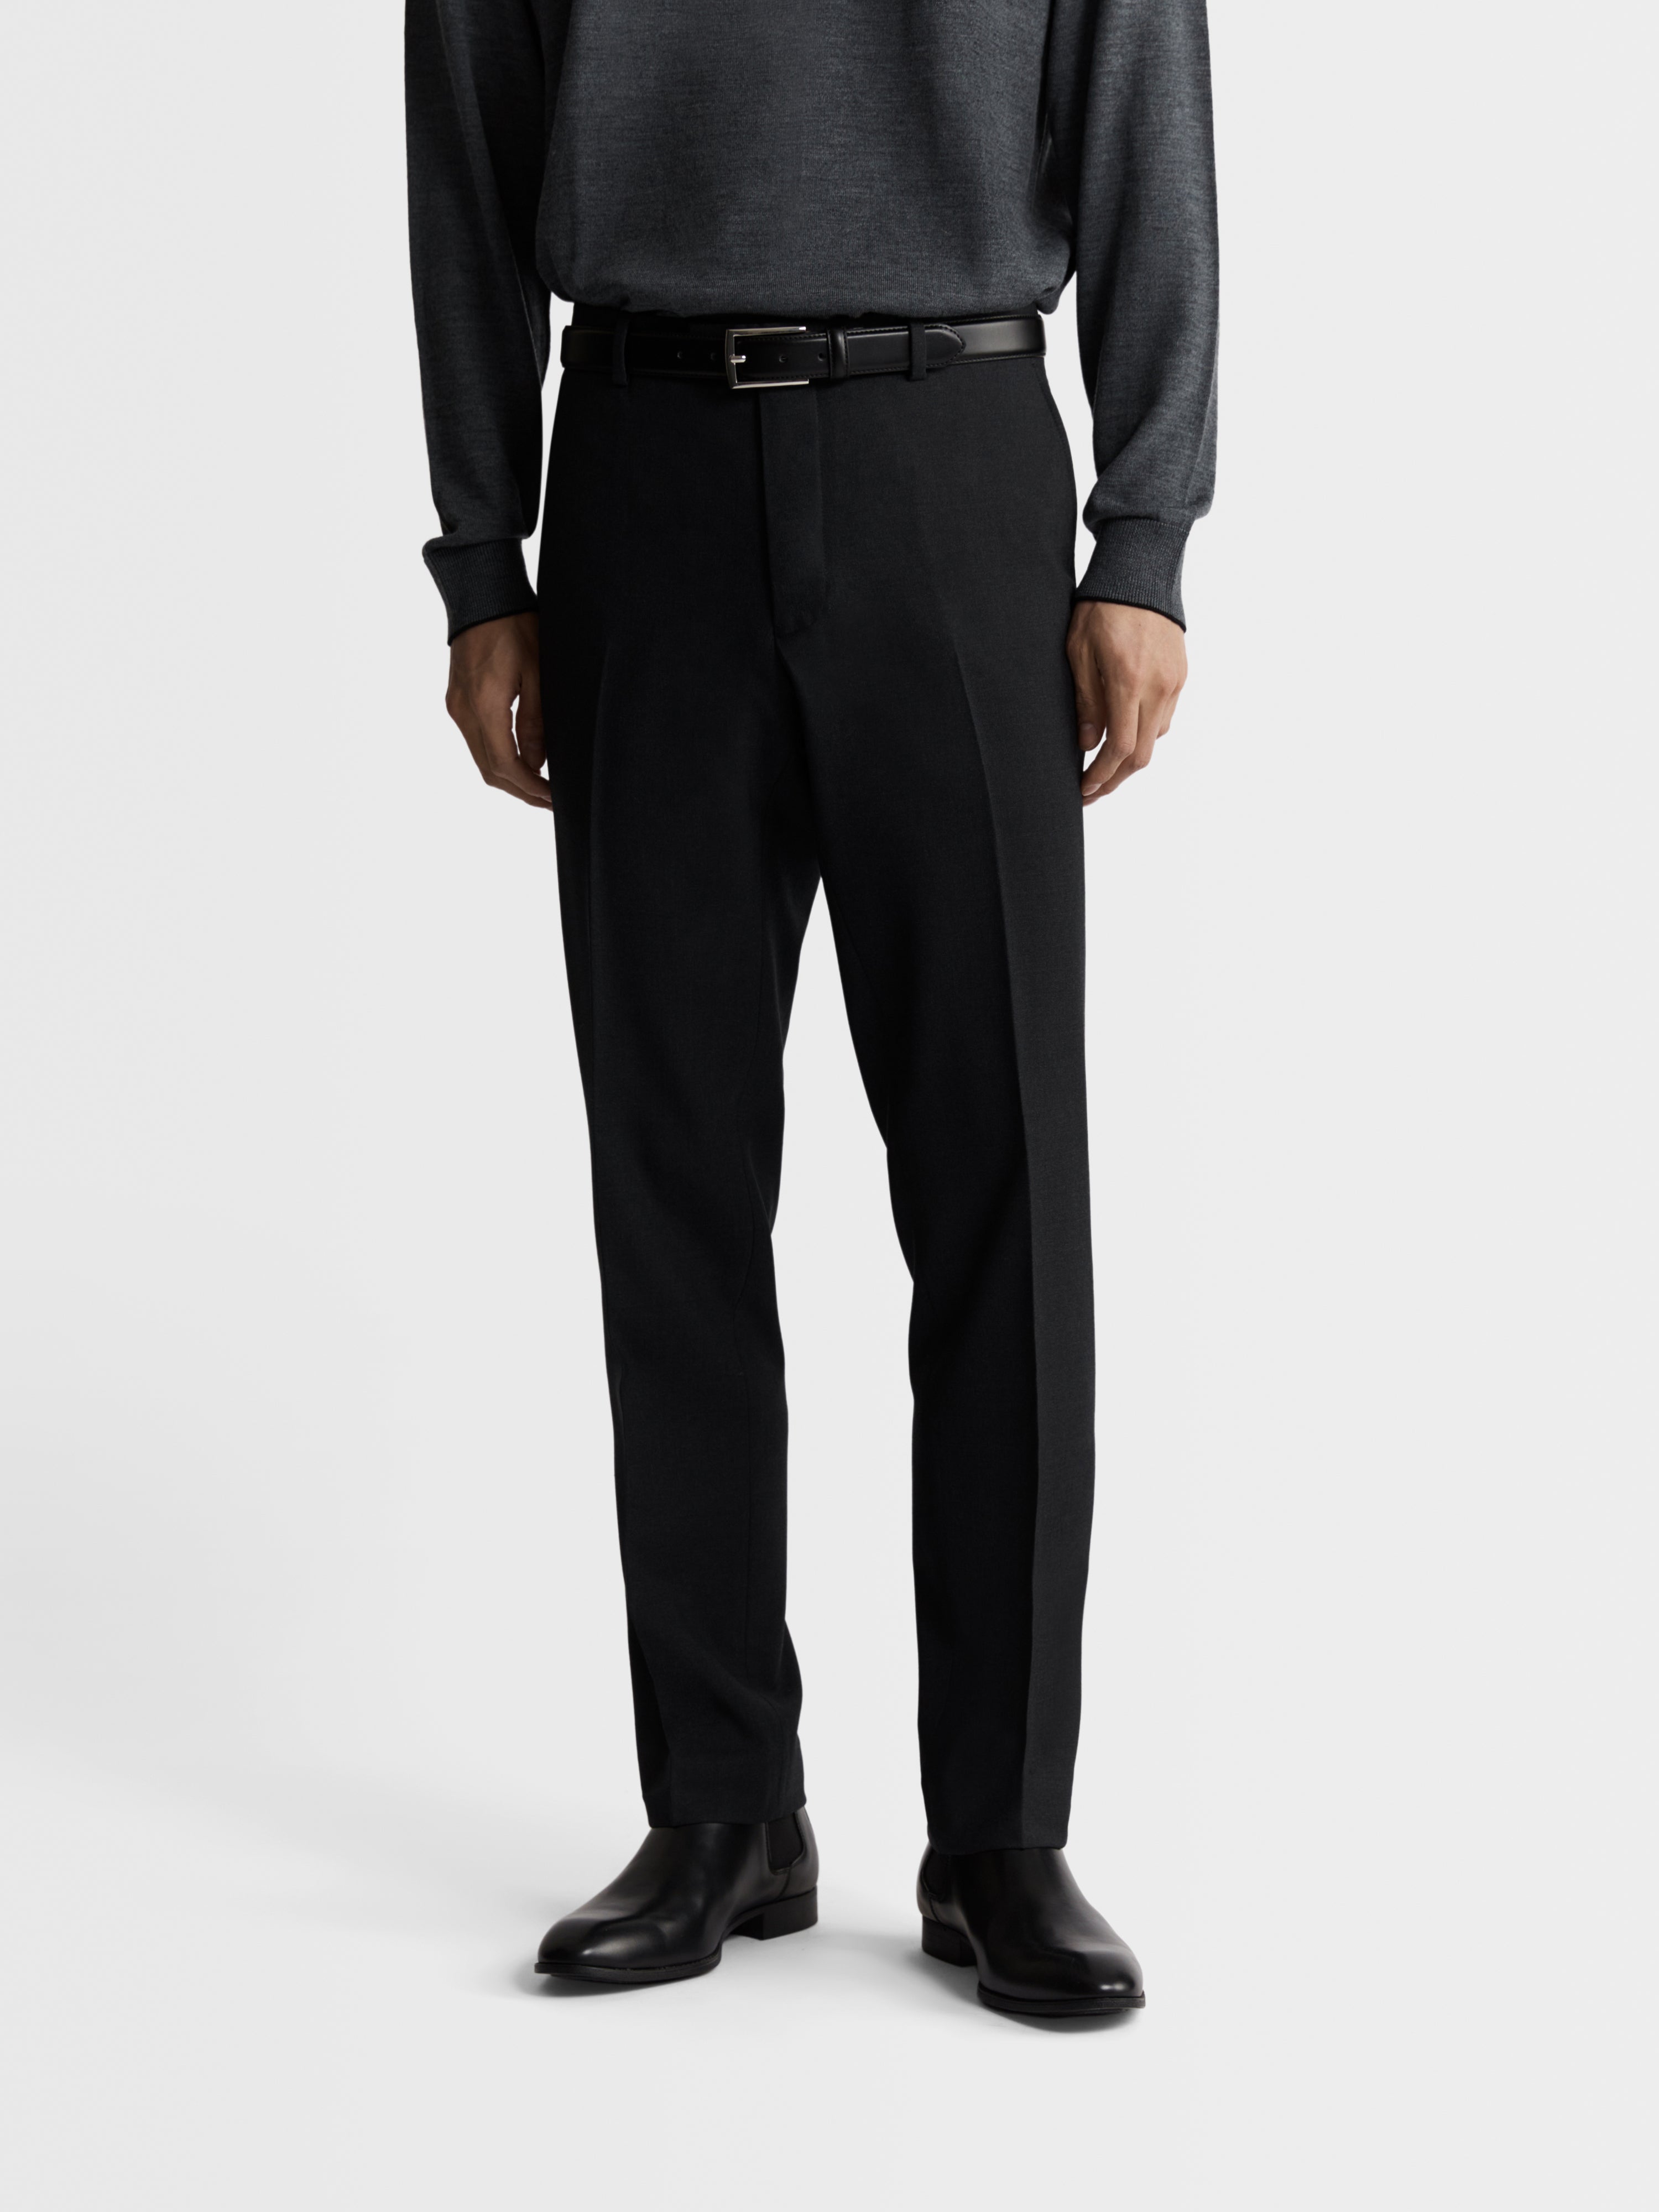 Marcello pleated wool trousers | The Row | Wool trousers, Mens trousers,  Wool pants